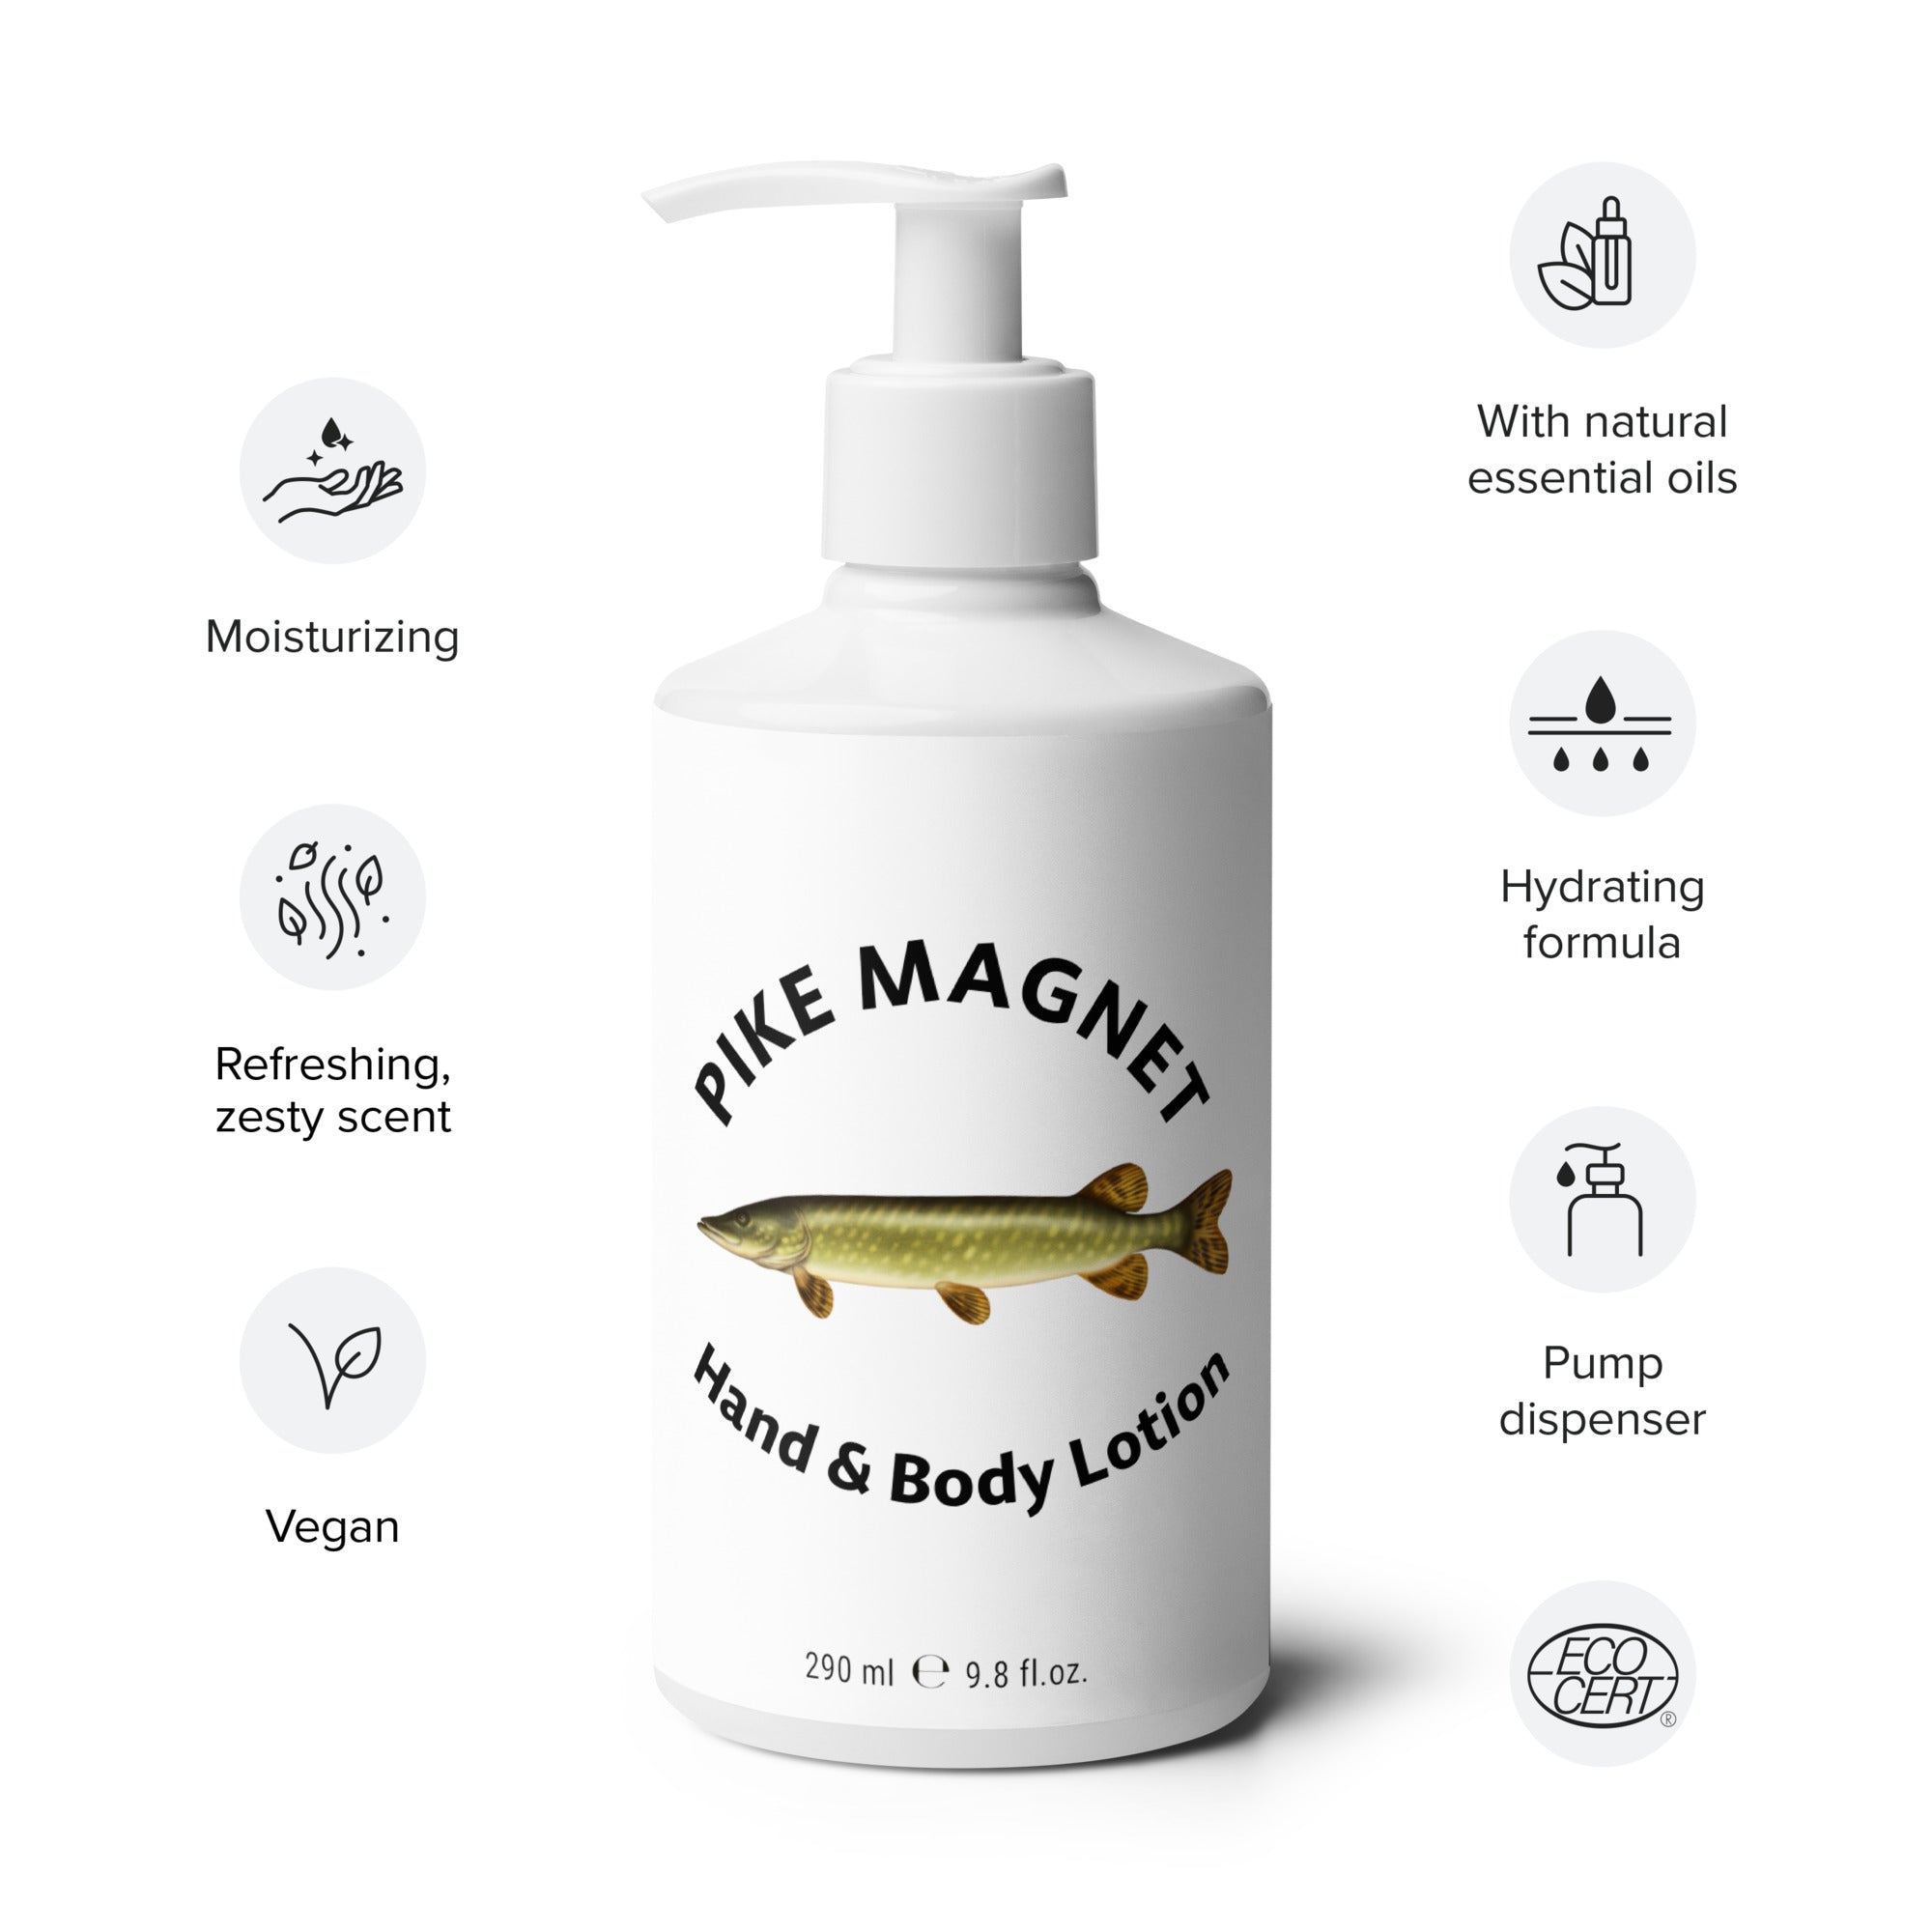 Pike Magnet - The Ultimate Attraction Potion - Oddhook